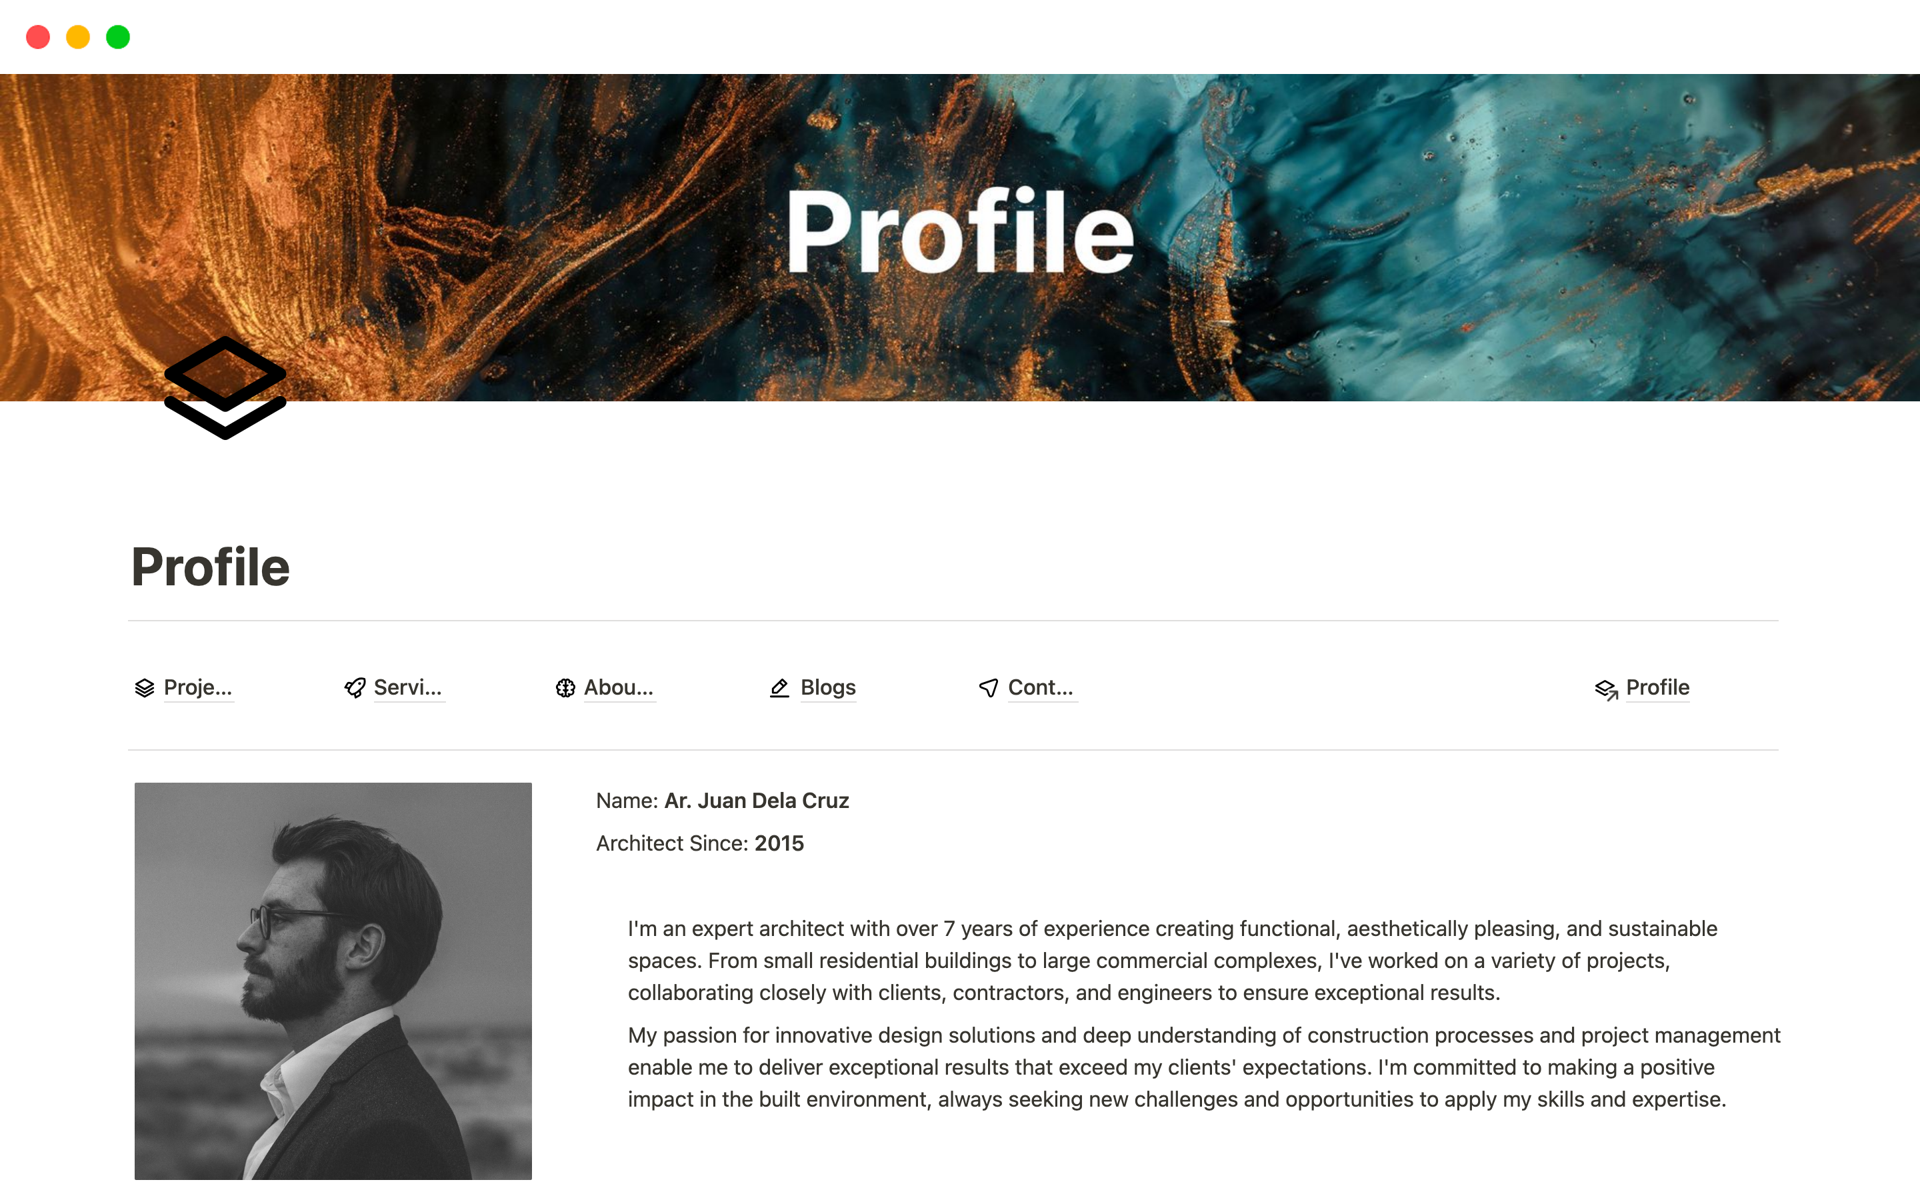 Introducing Profile - the ultimate solution for professionals looking to create their own personal brand and showcase their work in a sleek and stylish way.